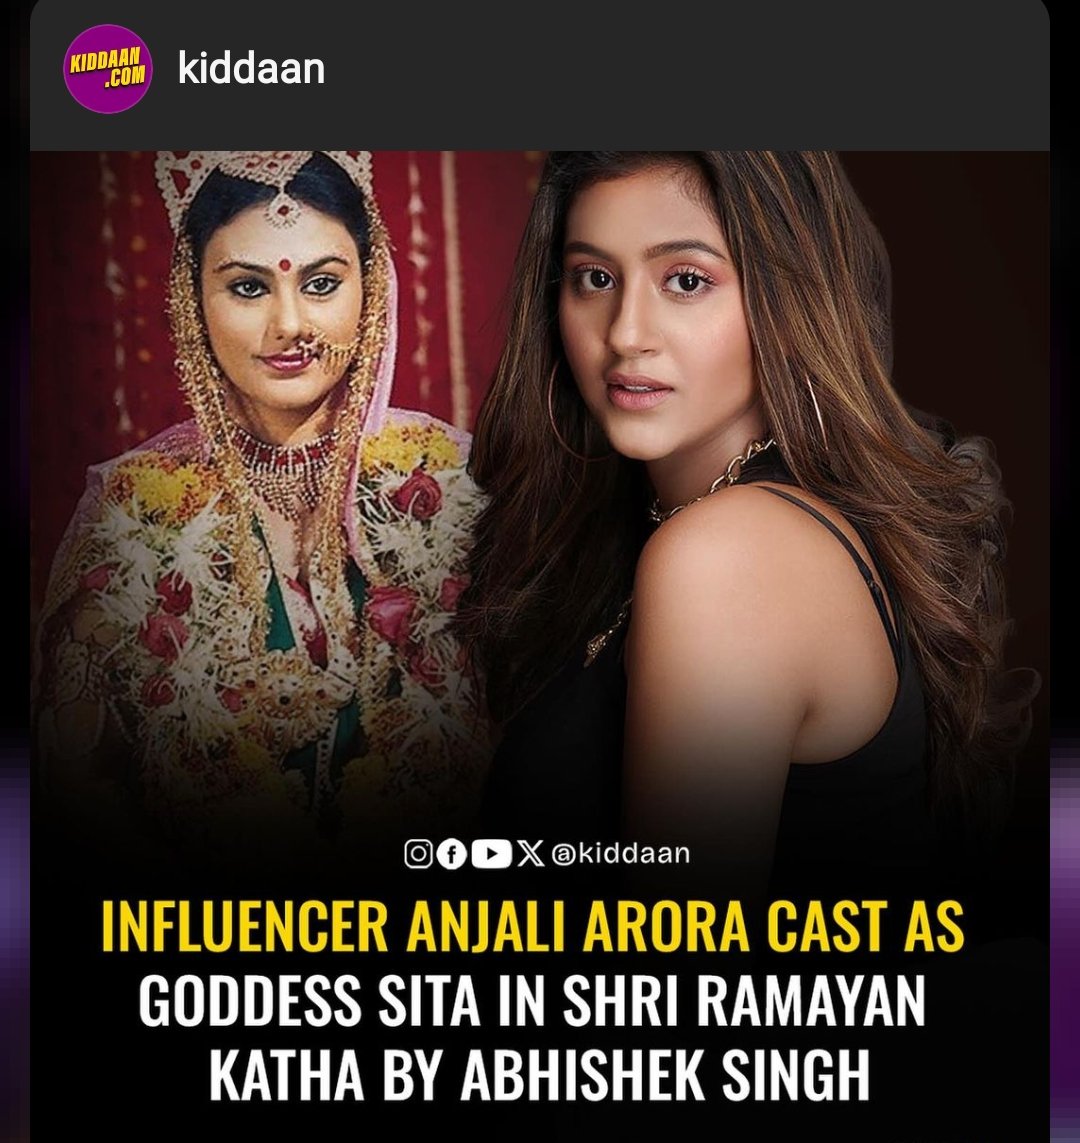 Ramayan is our faith not a movie or series from which ppl can make profit this is really bad why ppl are not reacting to this is wrong no one has right to play mata sita role. @HPhobiaWatch @firki07 @hindupost